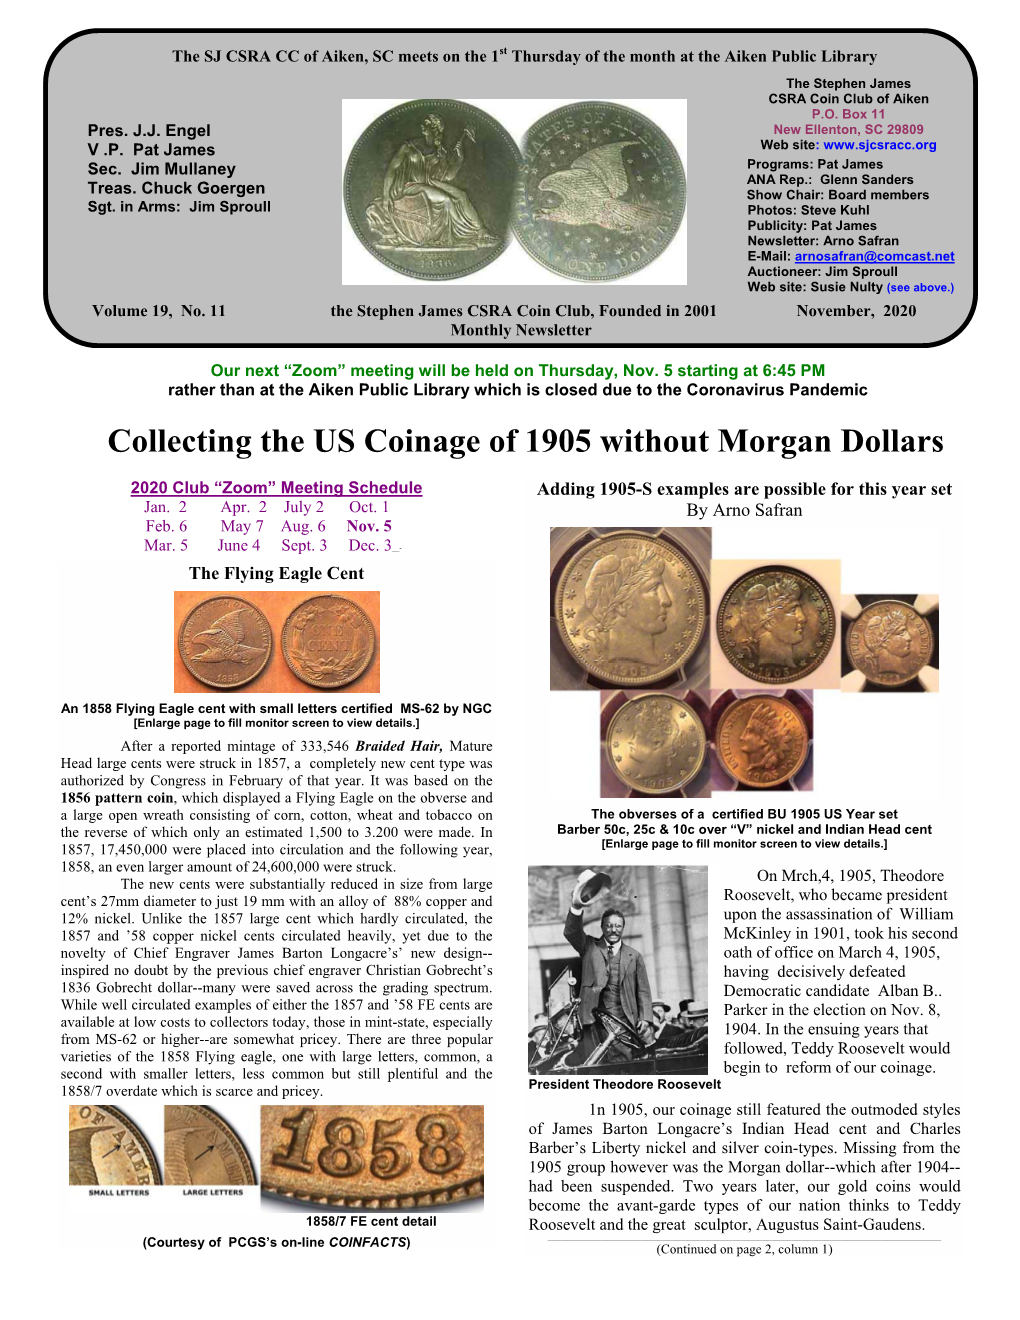 Collecting the US Coinage of 1905 Without Morgan Dollars